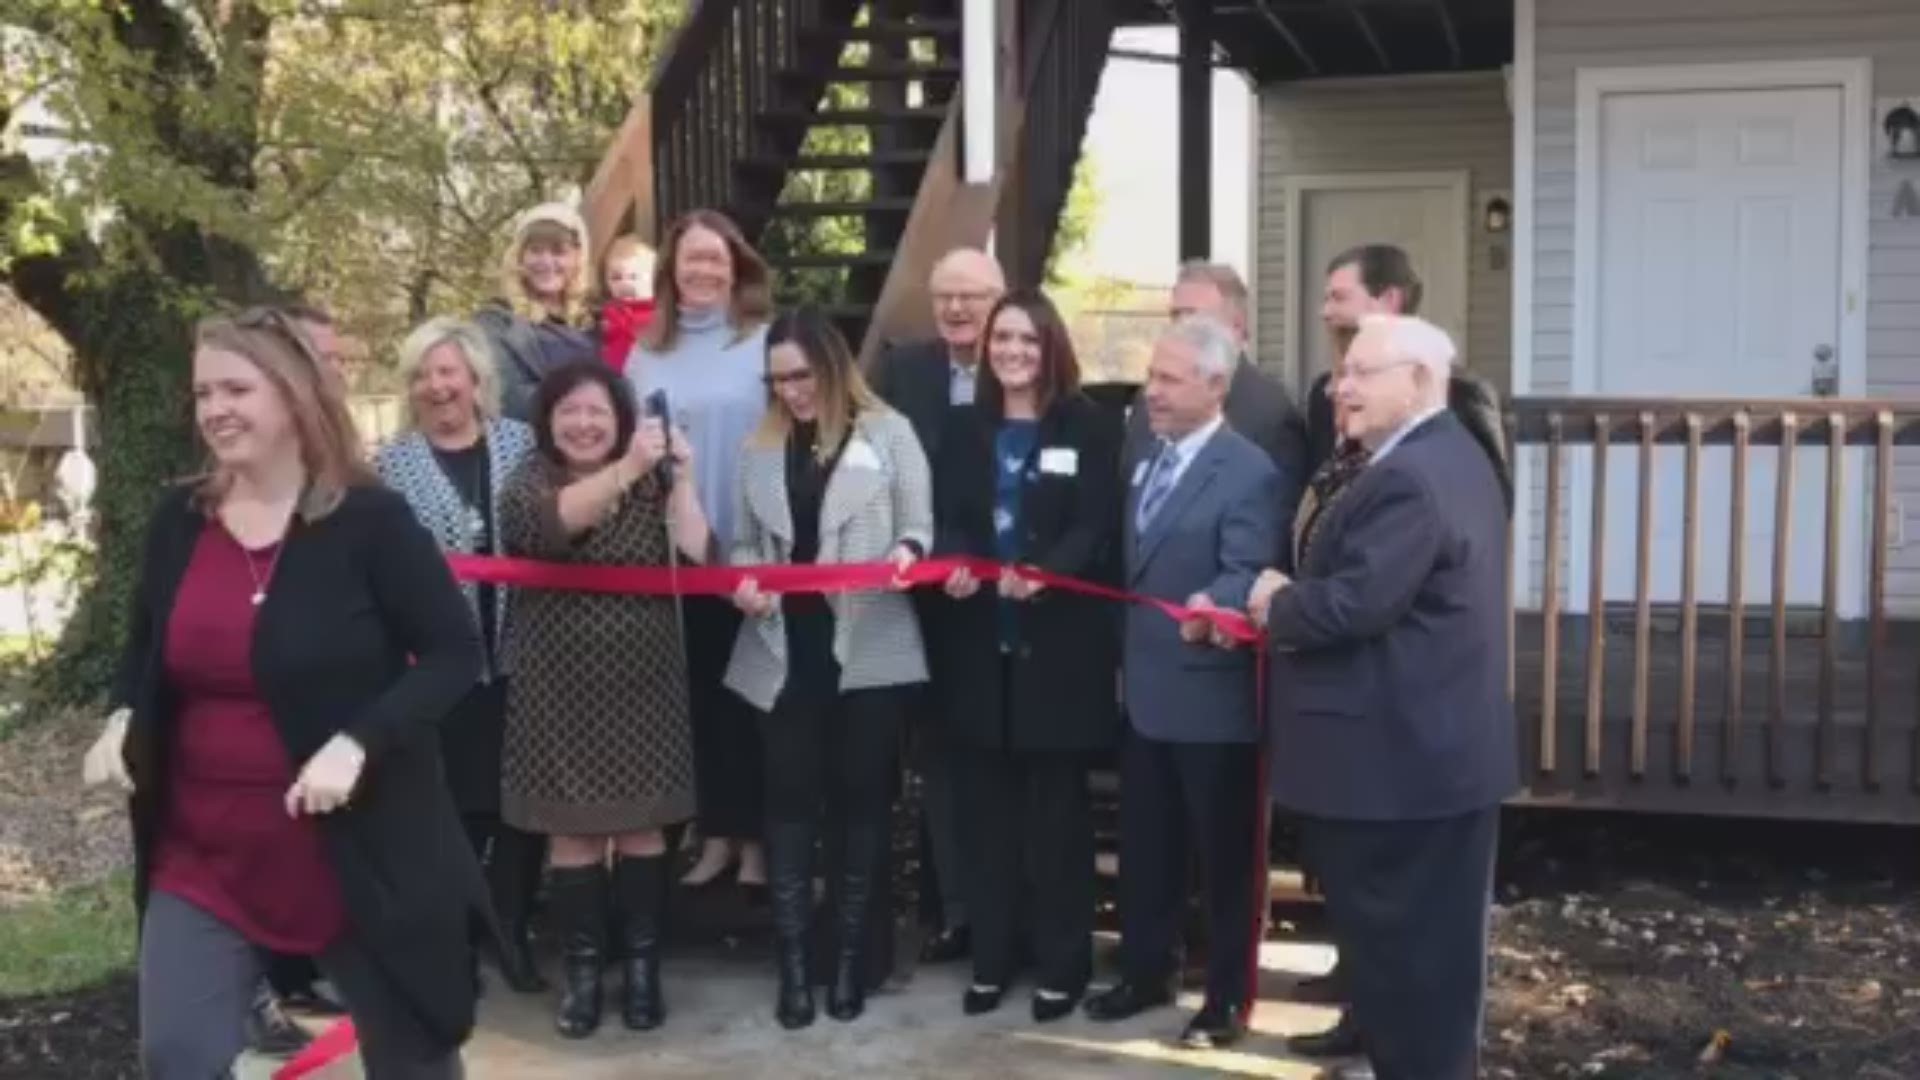 The Recovery Home is a four-unit transitional and supportive housing complex. It will house up to 20 women at a time for at least four months.